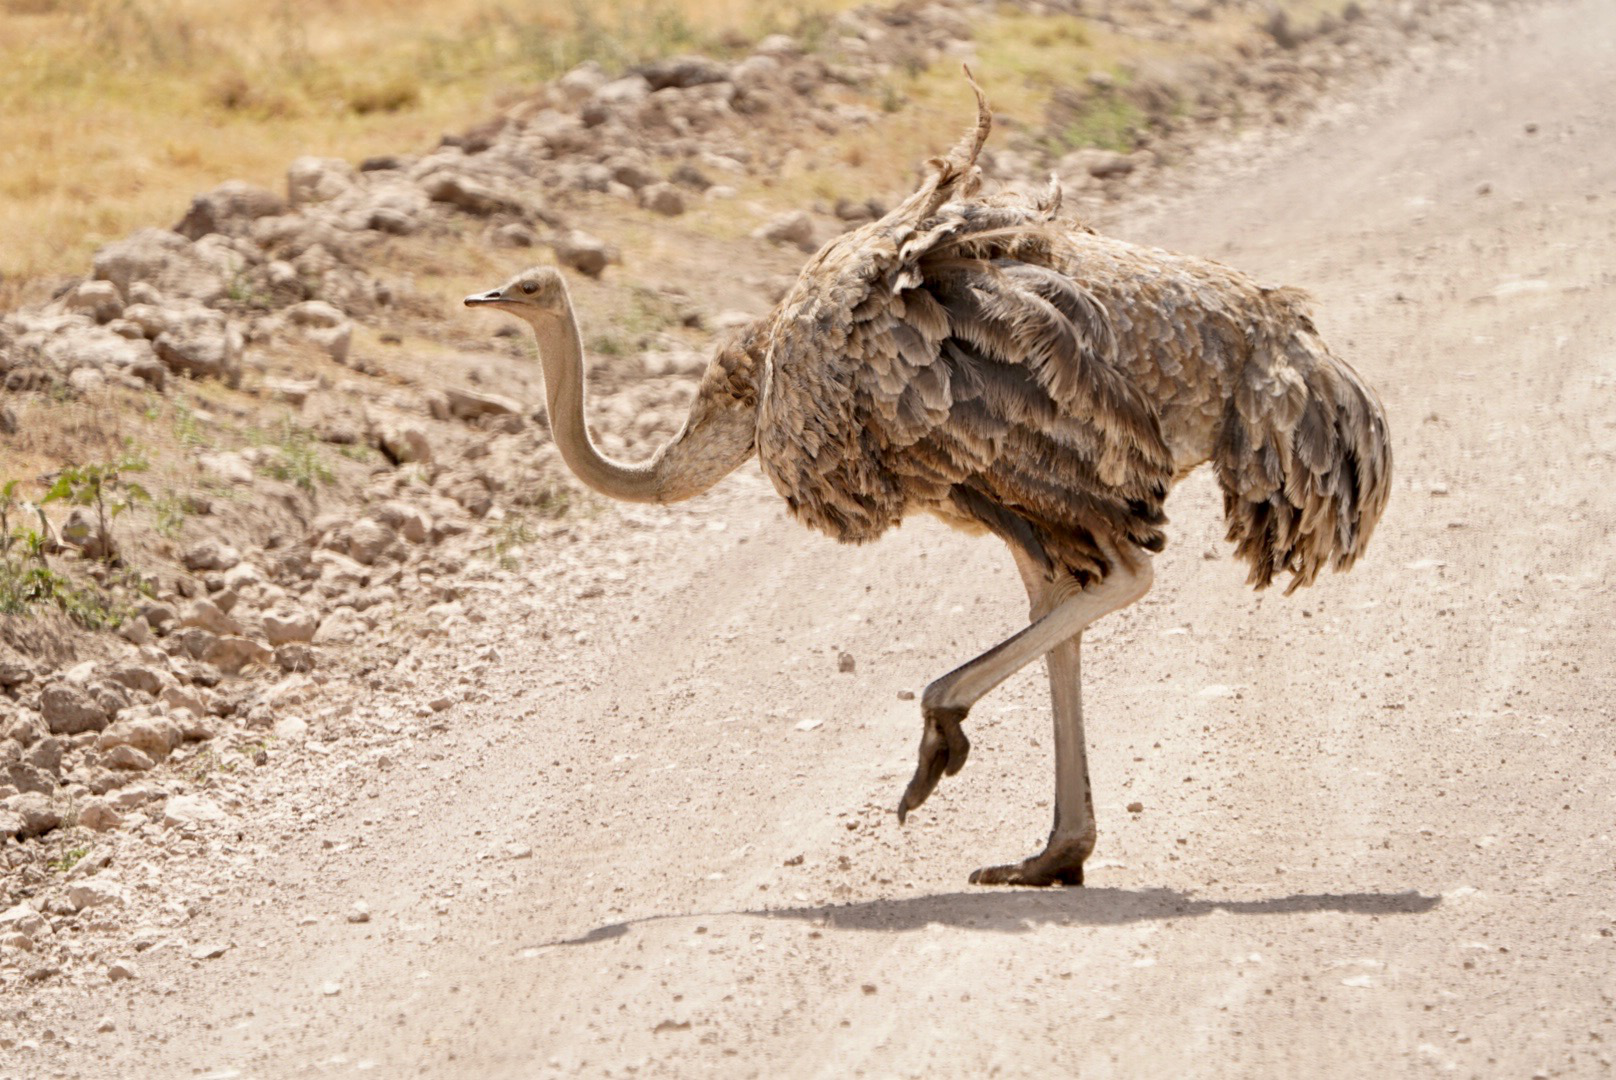 A brown and gray feathered ostritch walks past a dirt road, its neck bent into sort of a U shape. One of its legs is in the air, in the middle of a step.